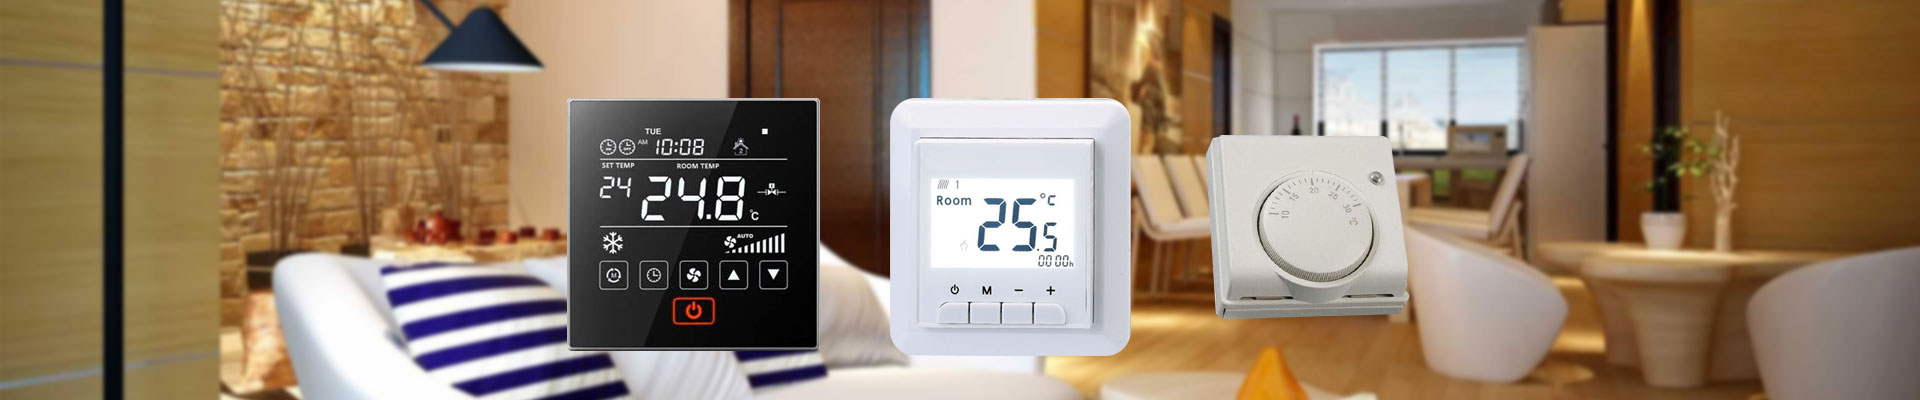 ST-HY08AC PID Touch Screen Thermostat 0-10V